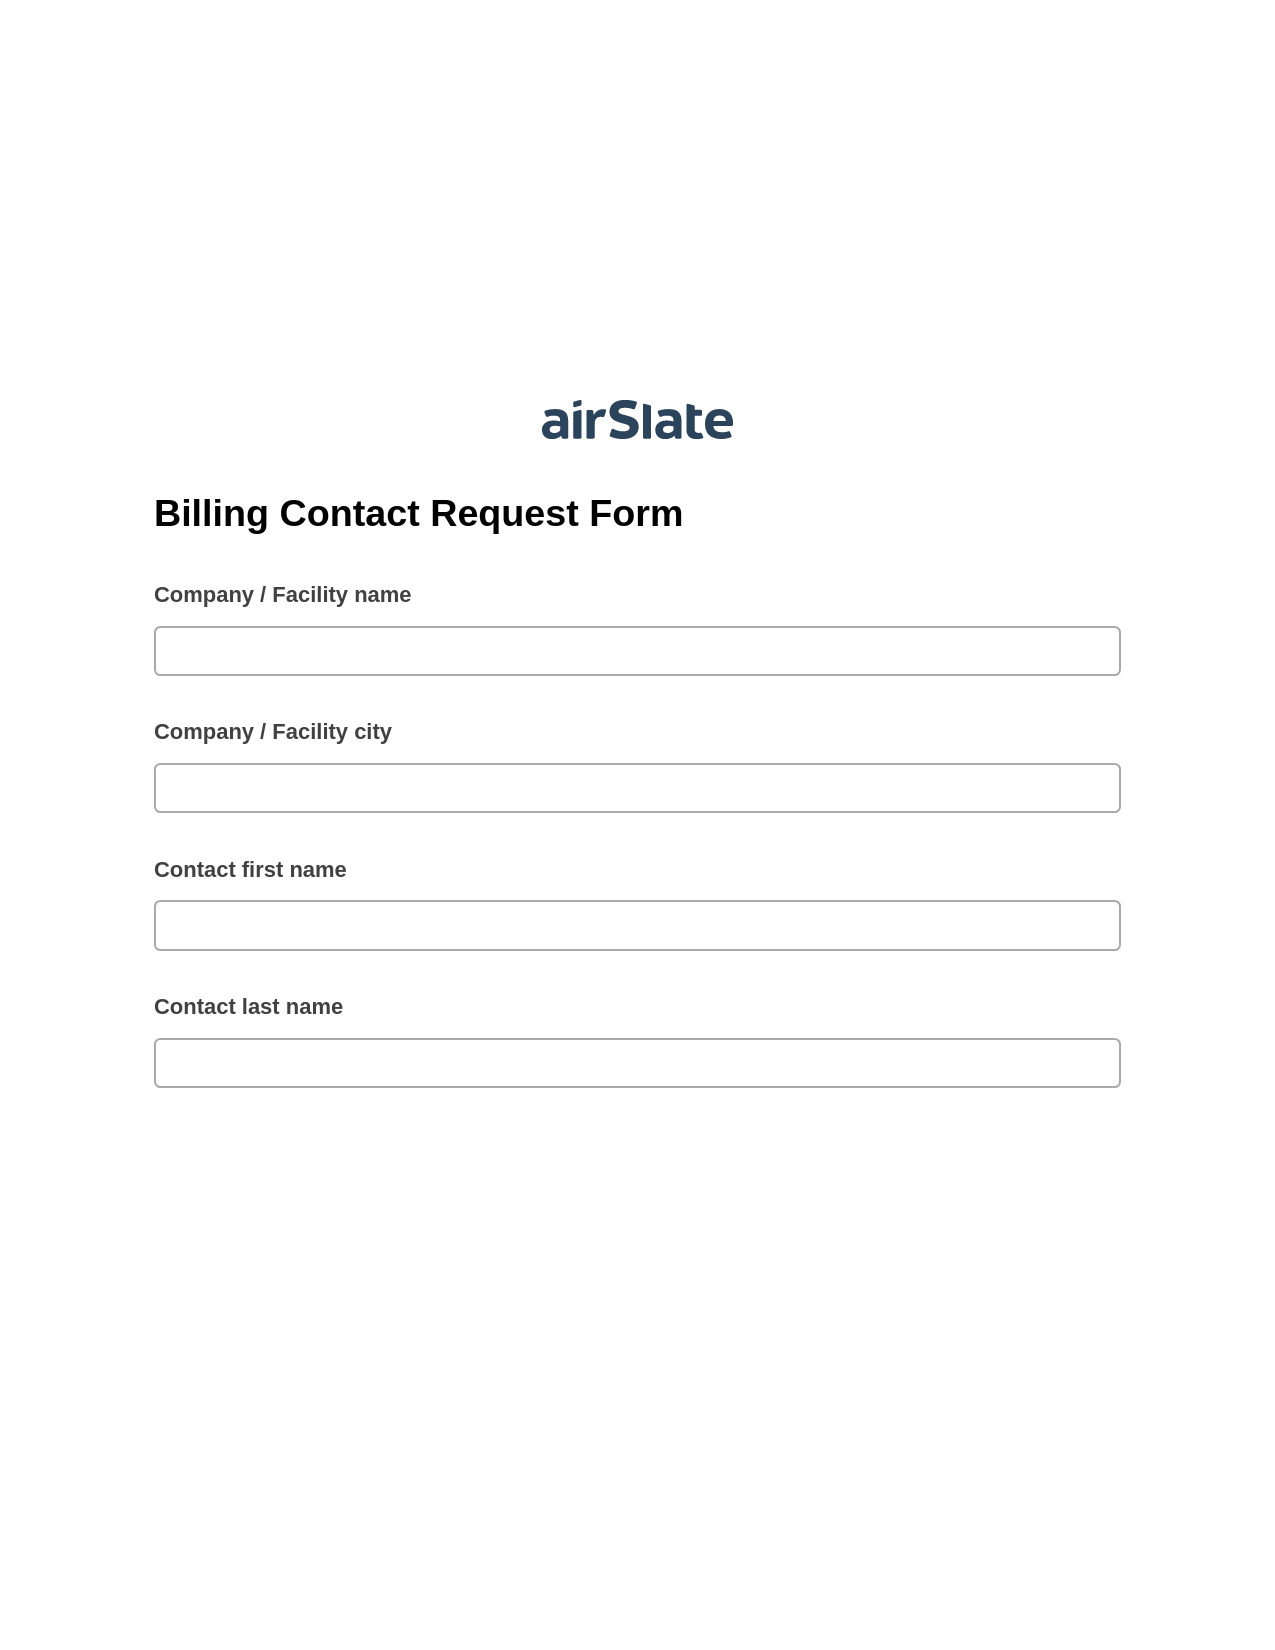 Billing Contact Request Form Pre-fill Dropdown from Airtable, Google Sheet Two-Way Binding Bot, Box Bot